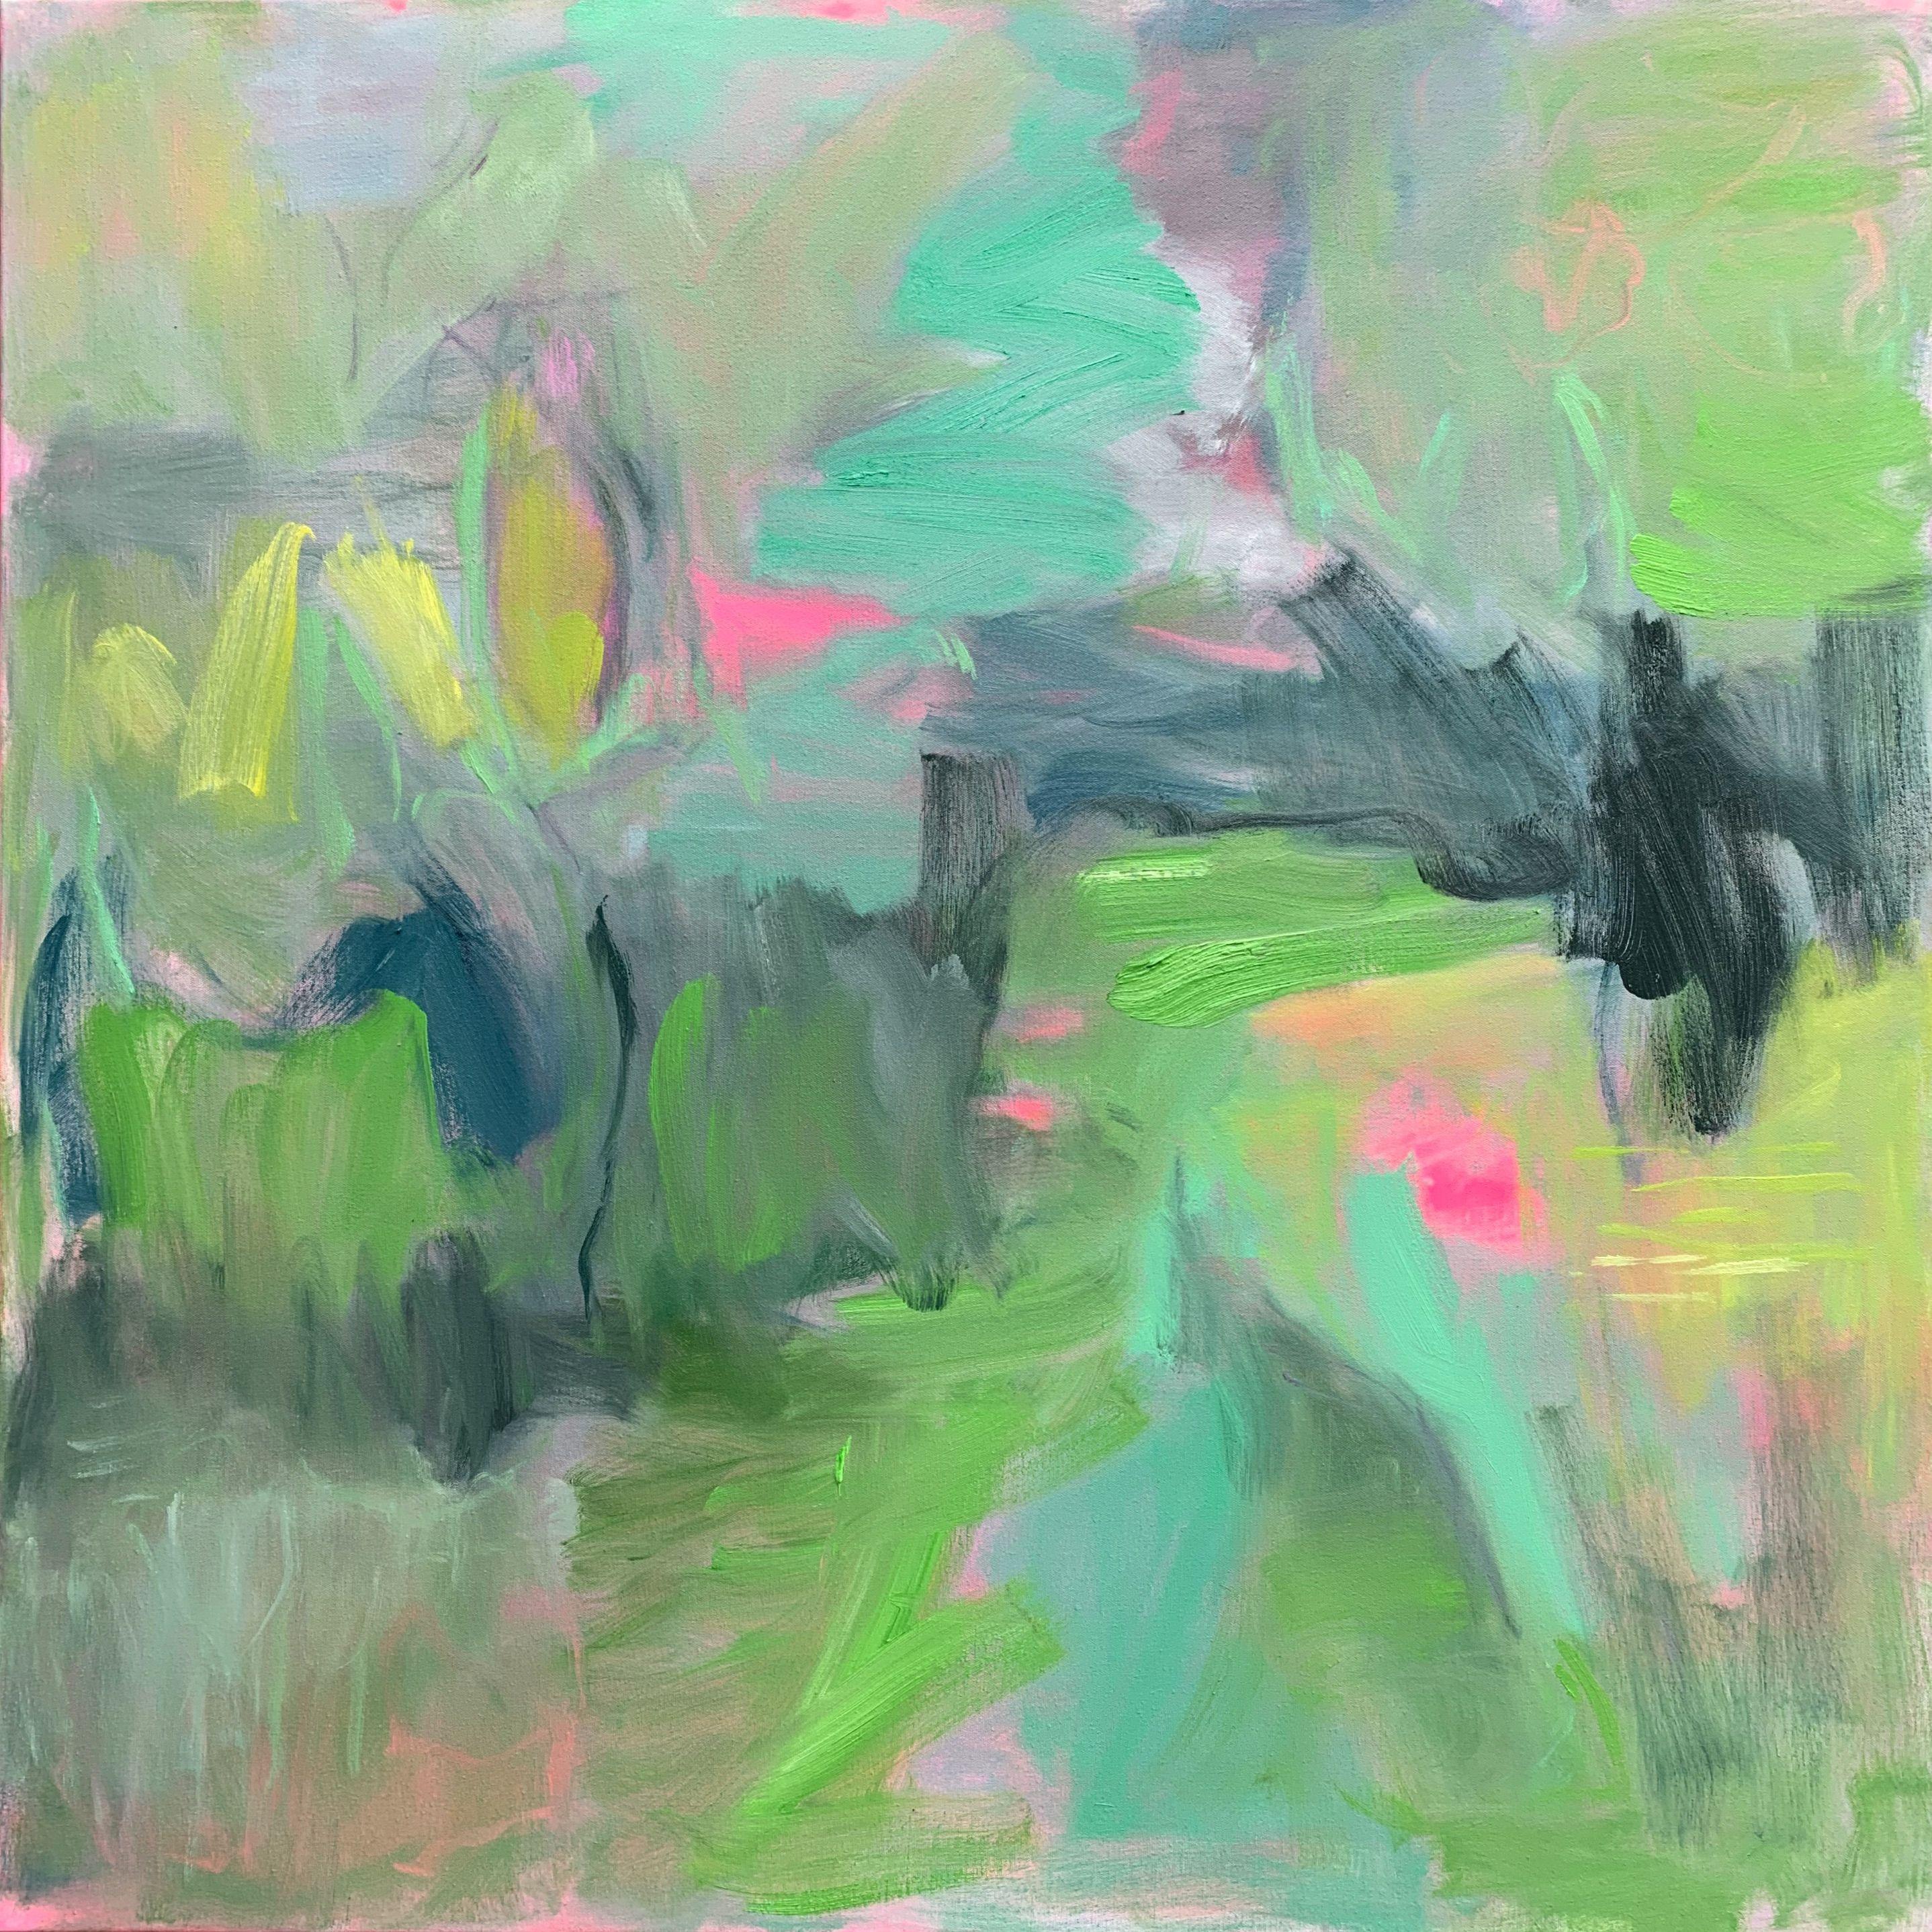 "Forest Floor" is an abstract expressionist oil painting on canvas by popular US artist, Trixie Pitts. The palette is bright and refreshing, and includes a wide range of color including robin's egg blue, bright pink, bright green, light green, dark